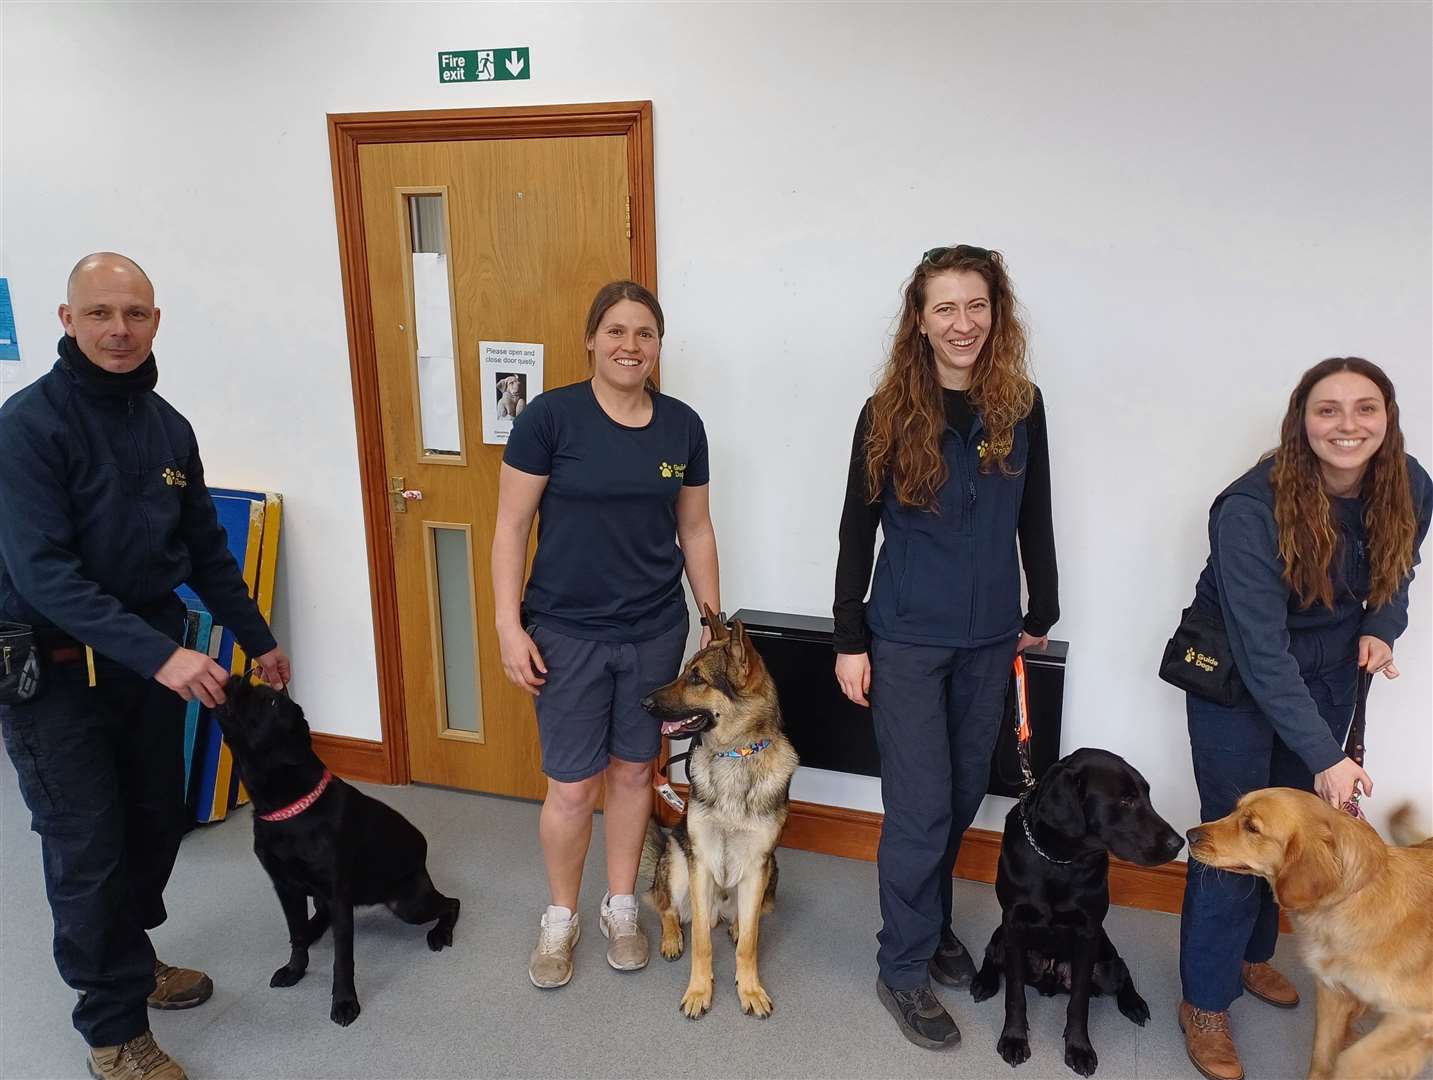 Maidstone Guide Dog trainer Stacey Donnelly says it's a rewarding job